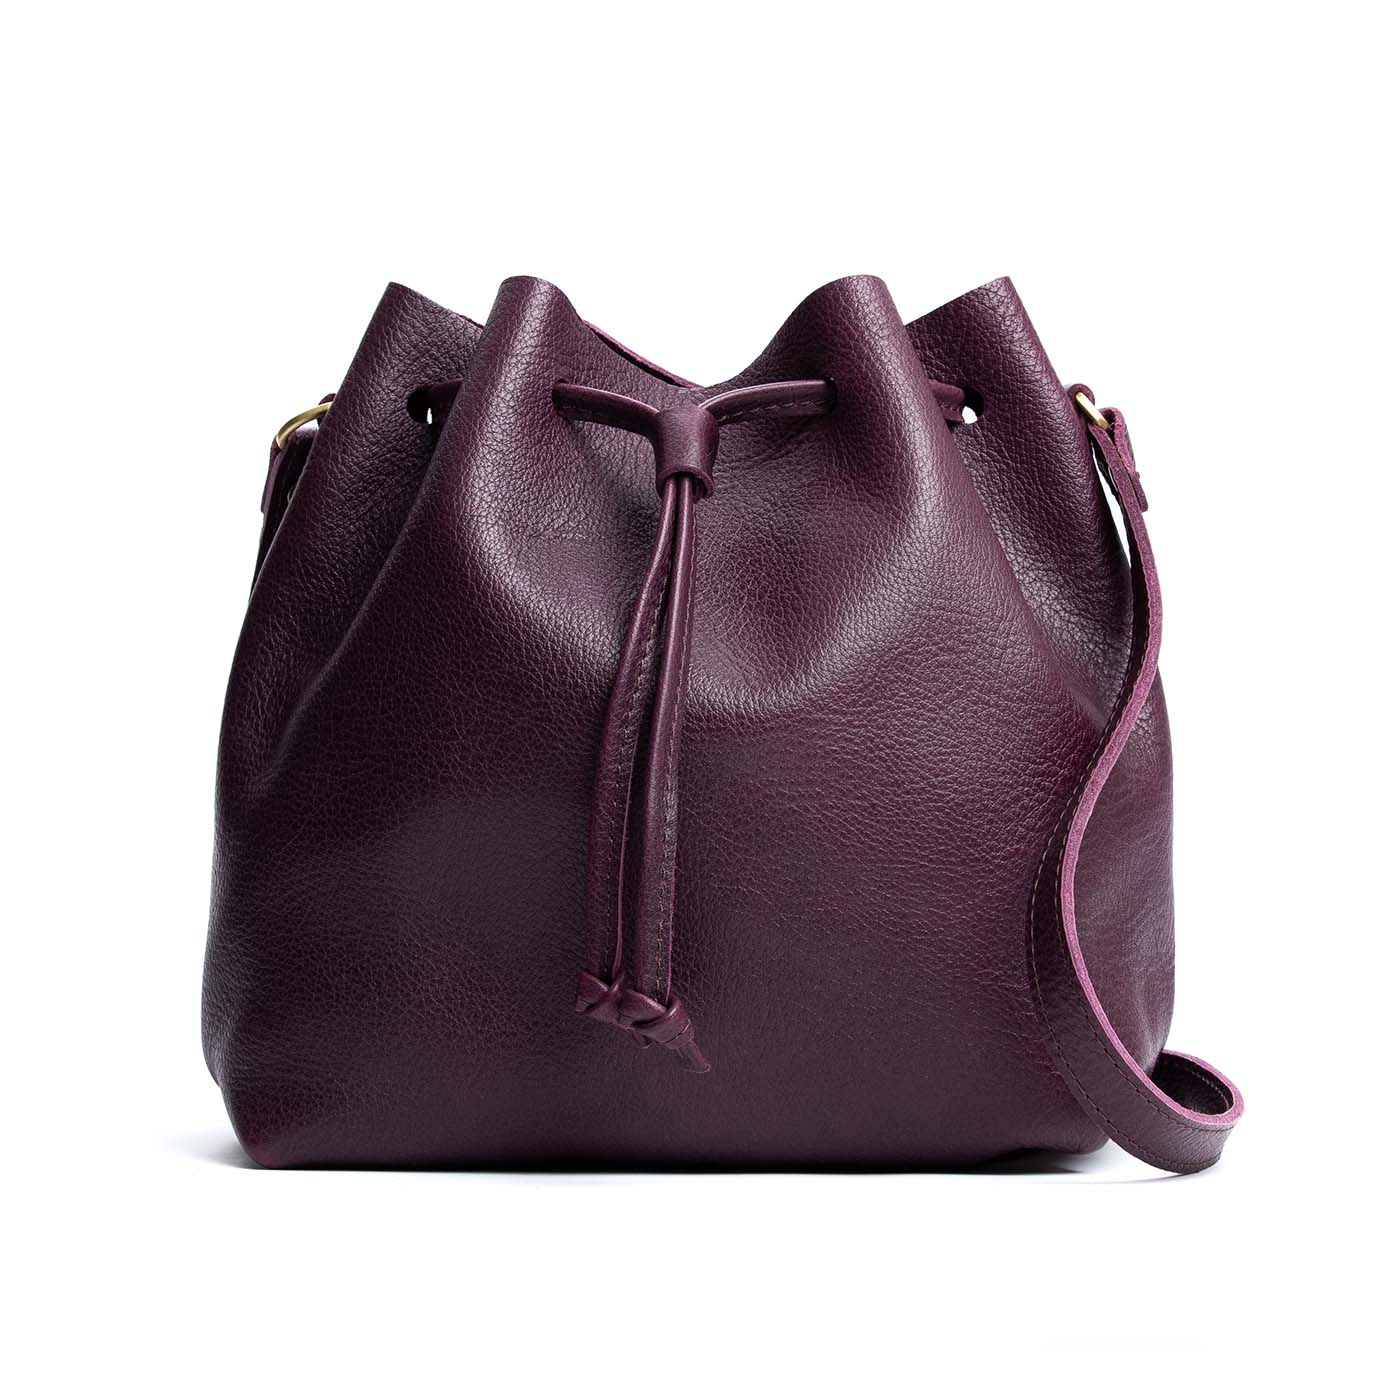 'Almost Perfect' Bucket Bag